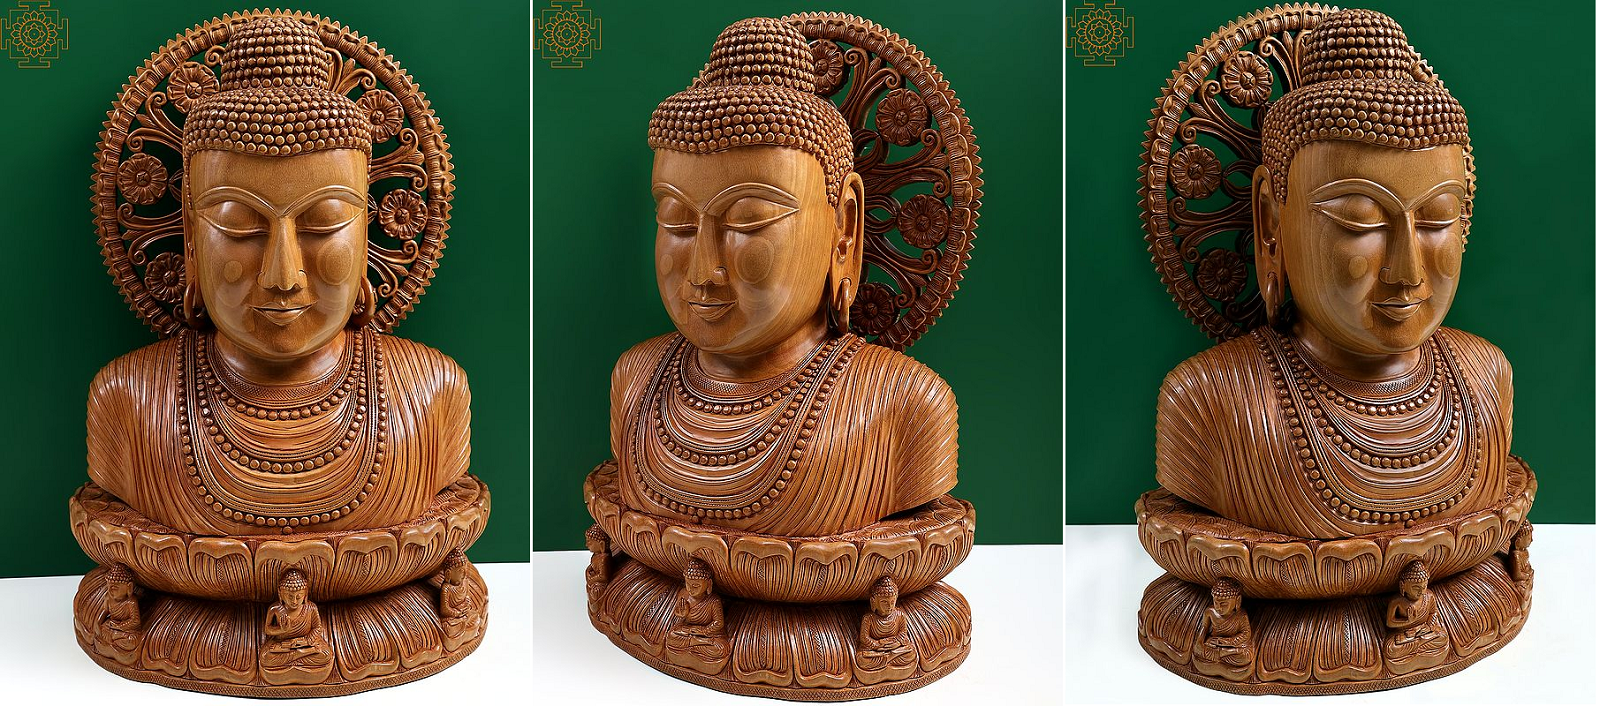 Chinese Buddha Statues for Sale at Online Auction | Modern & Antique  Chinese Buddha Statues